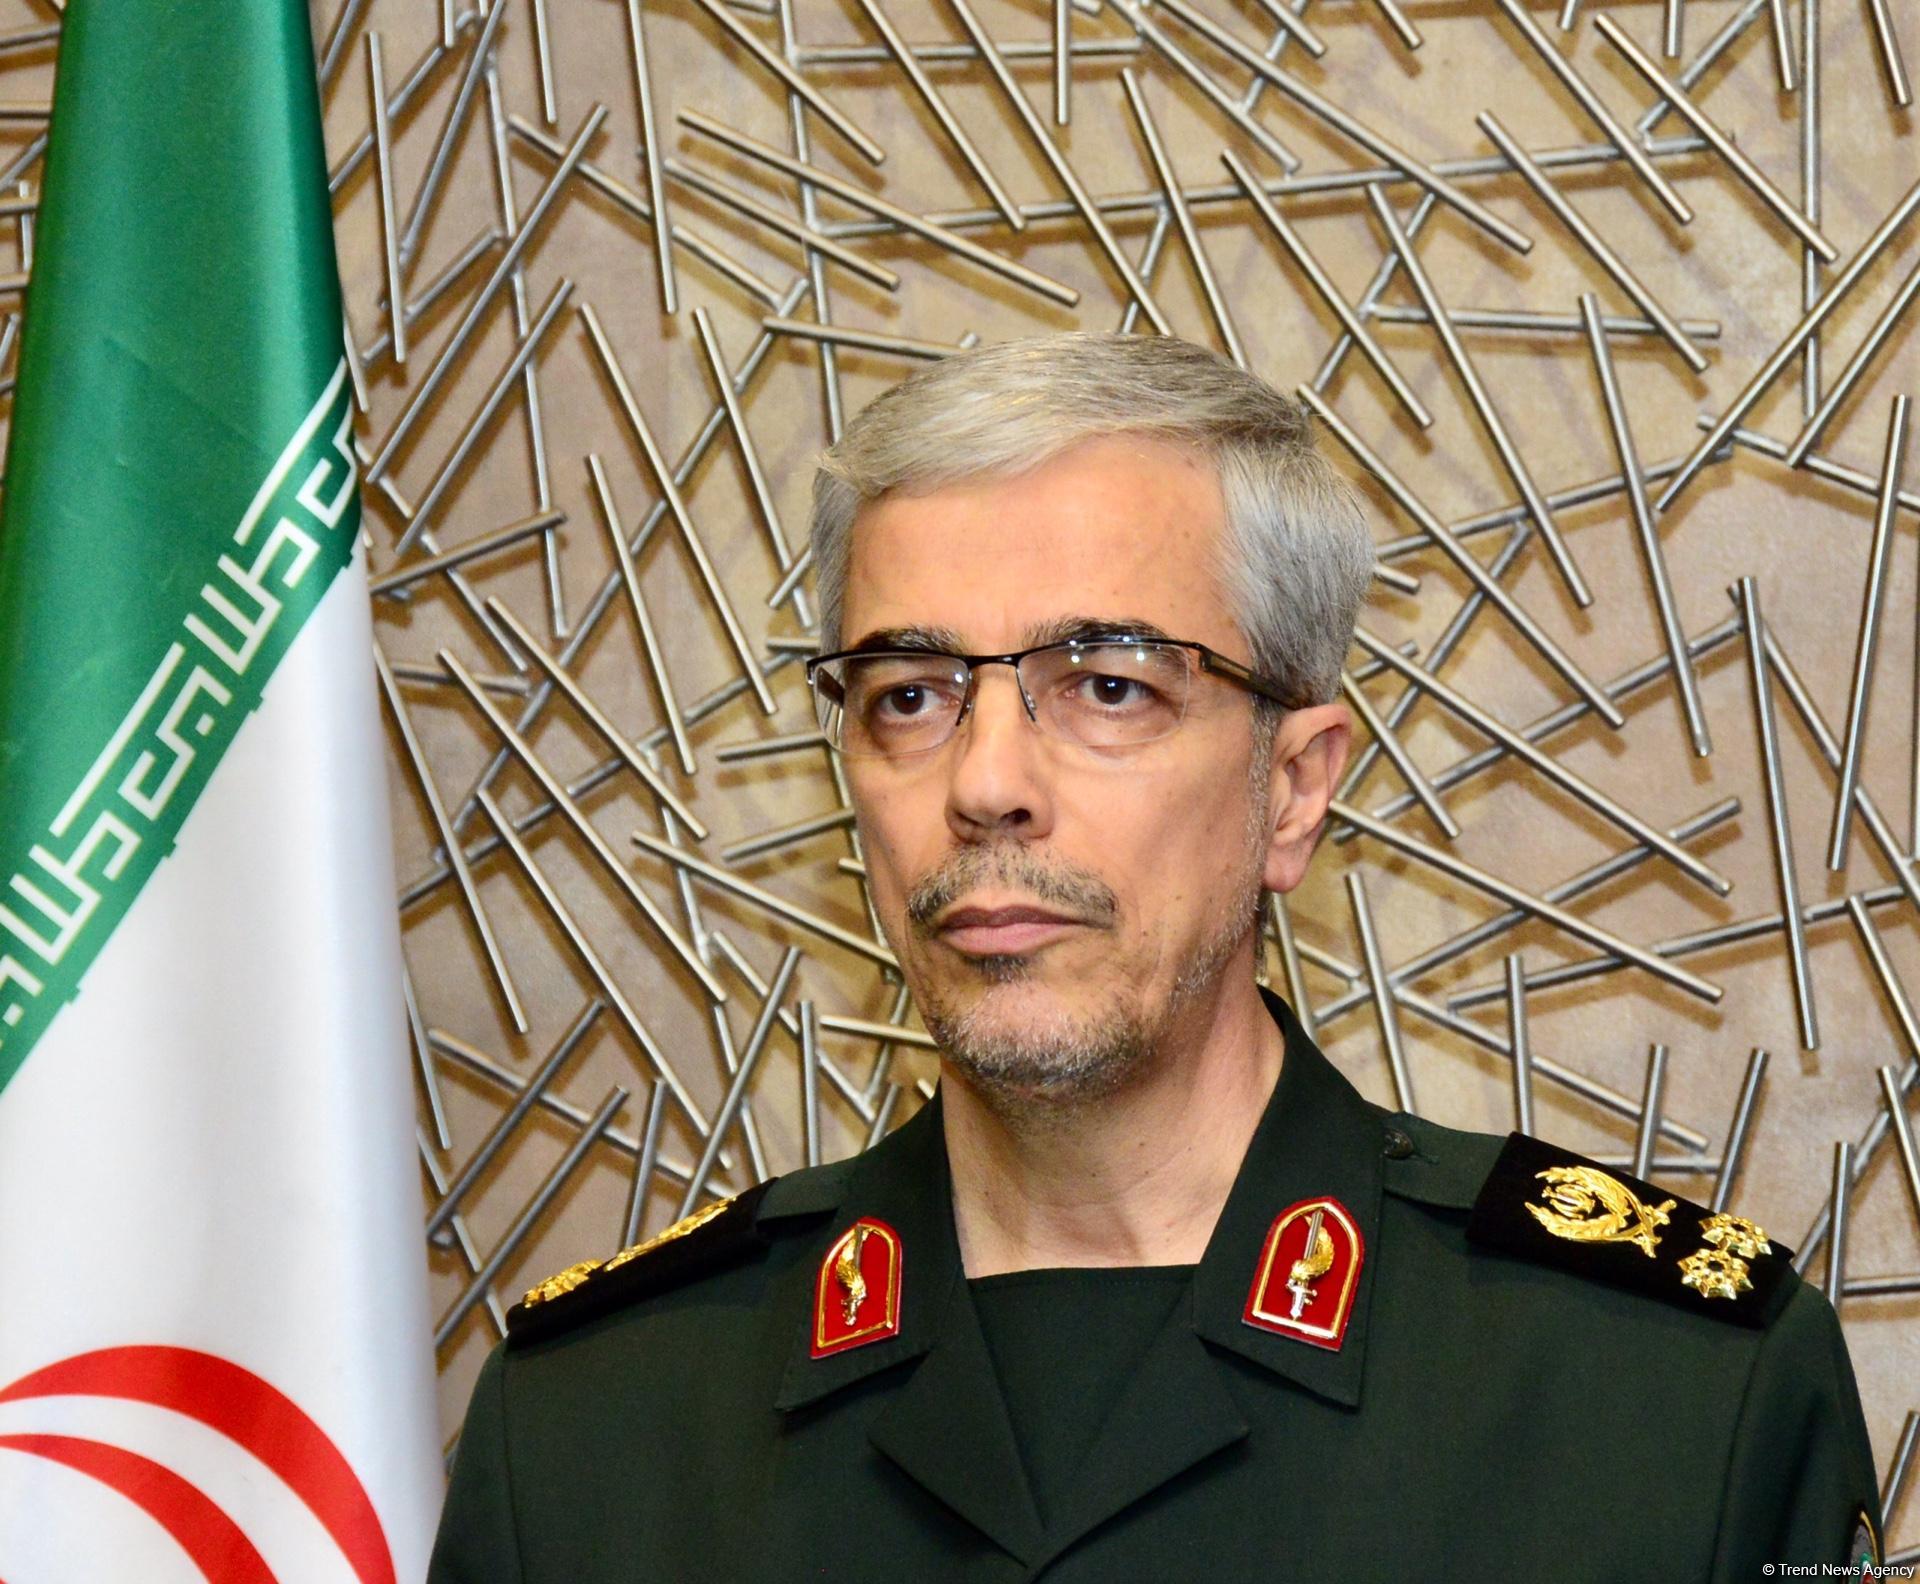 Major-General: If Iran intends to close Strait of Hormuz, it will announce it